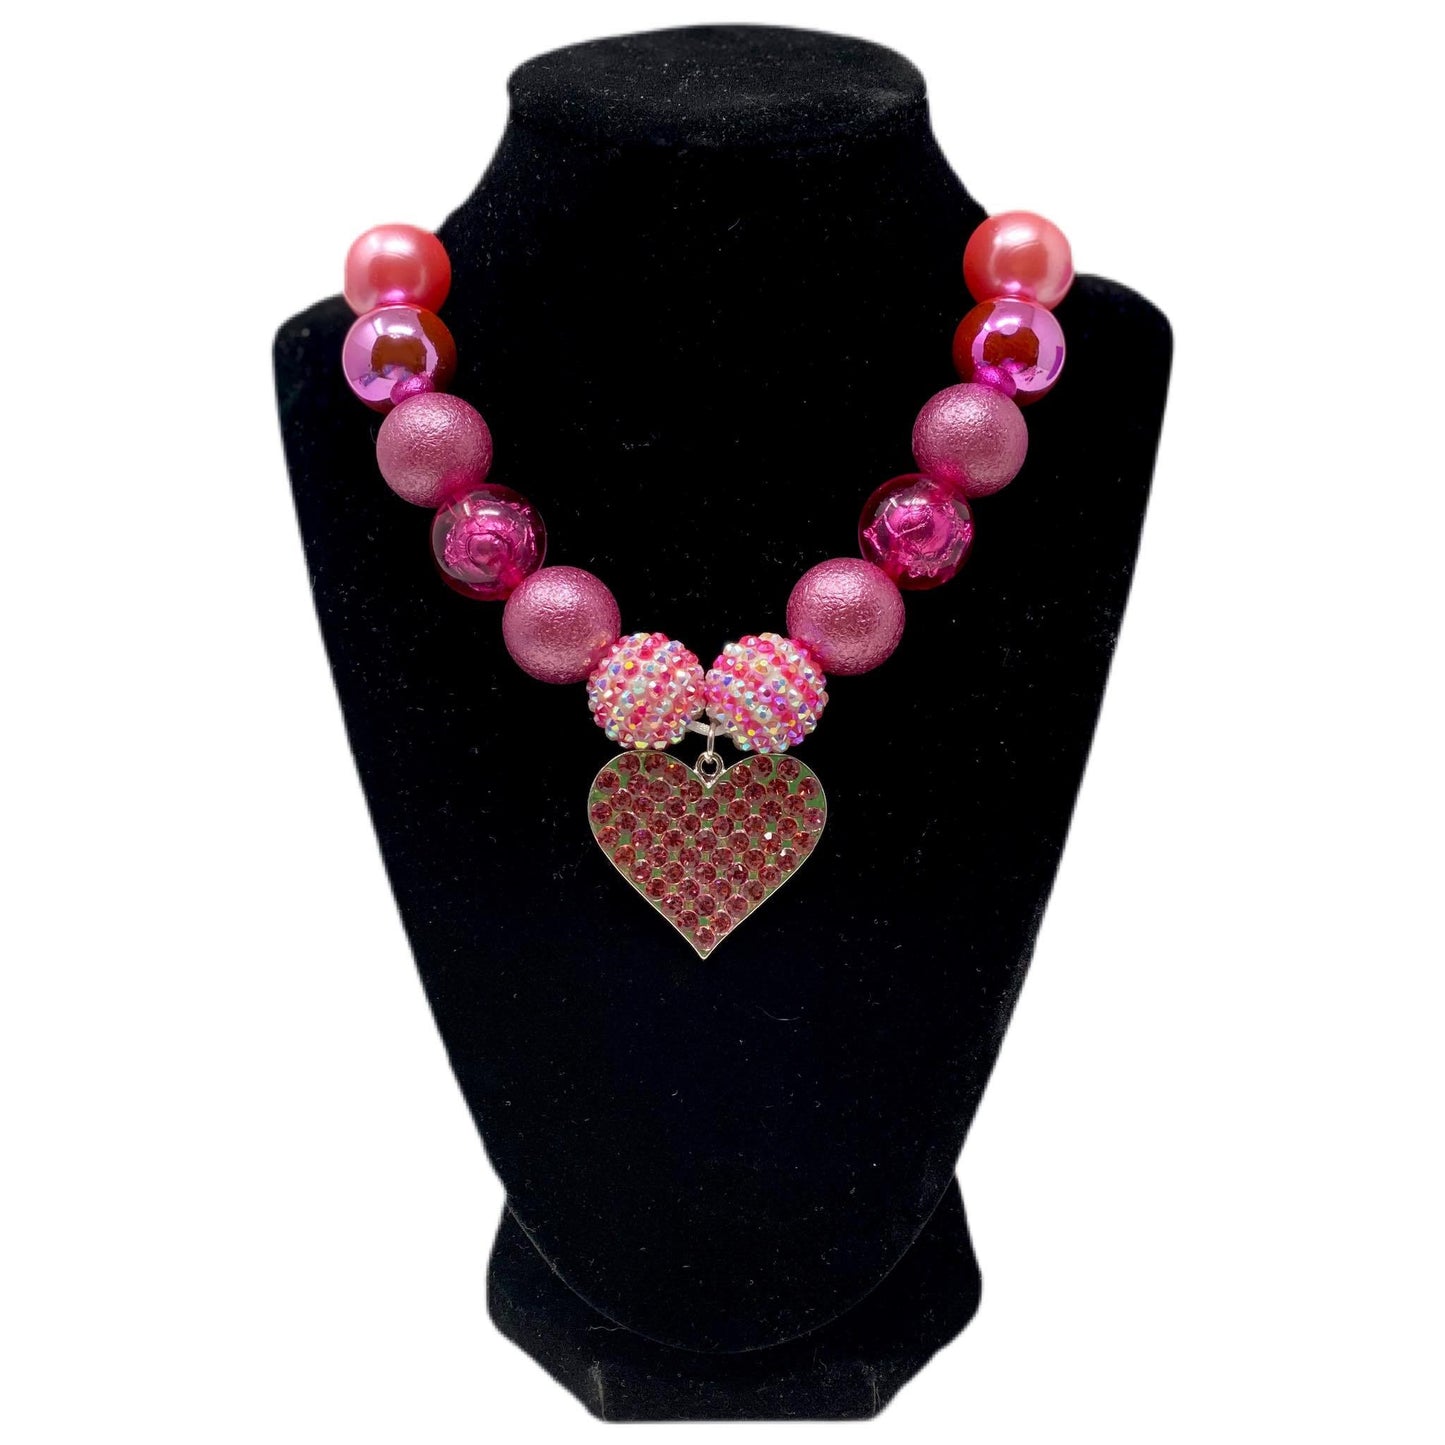 V-Day Bubblegum Necklace with Pink Heart Pendant